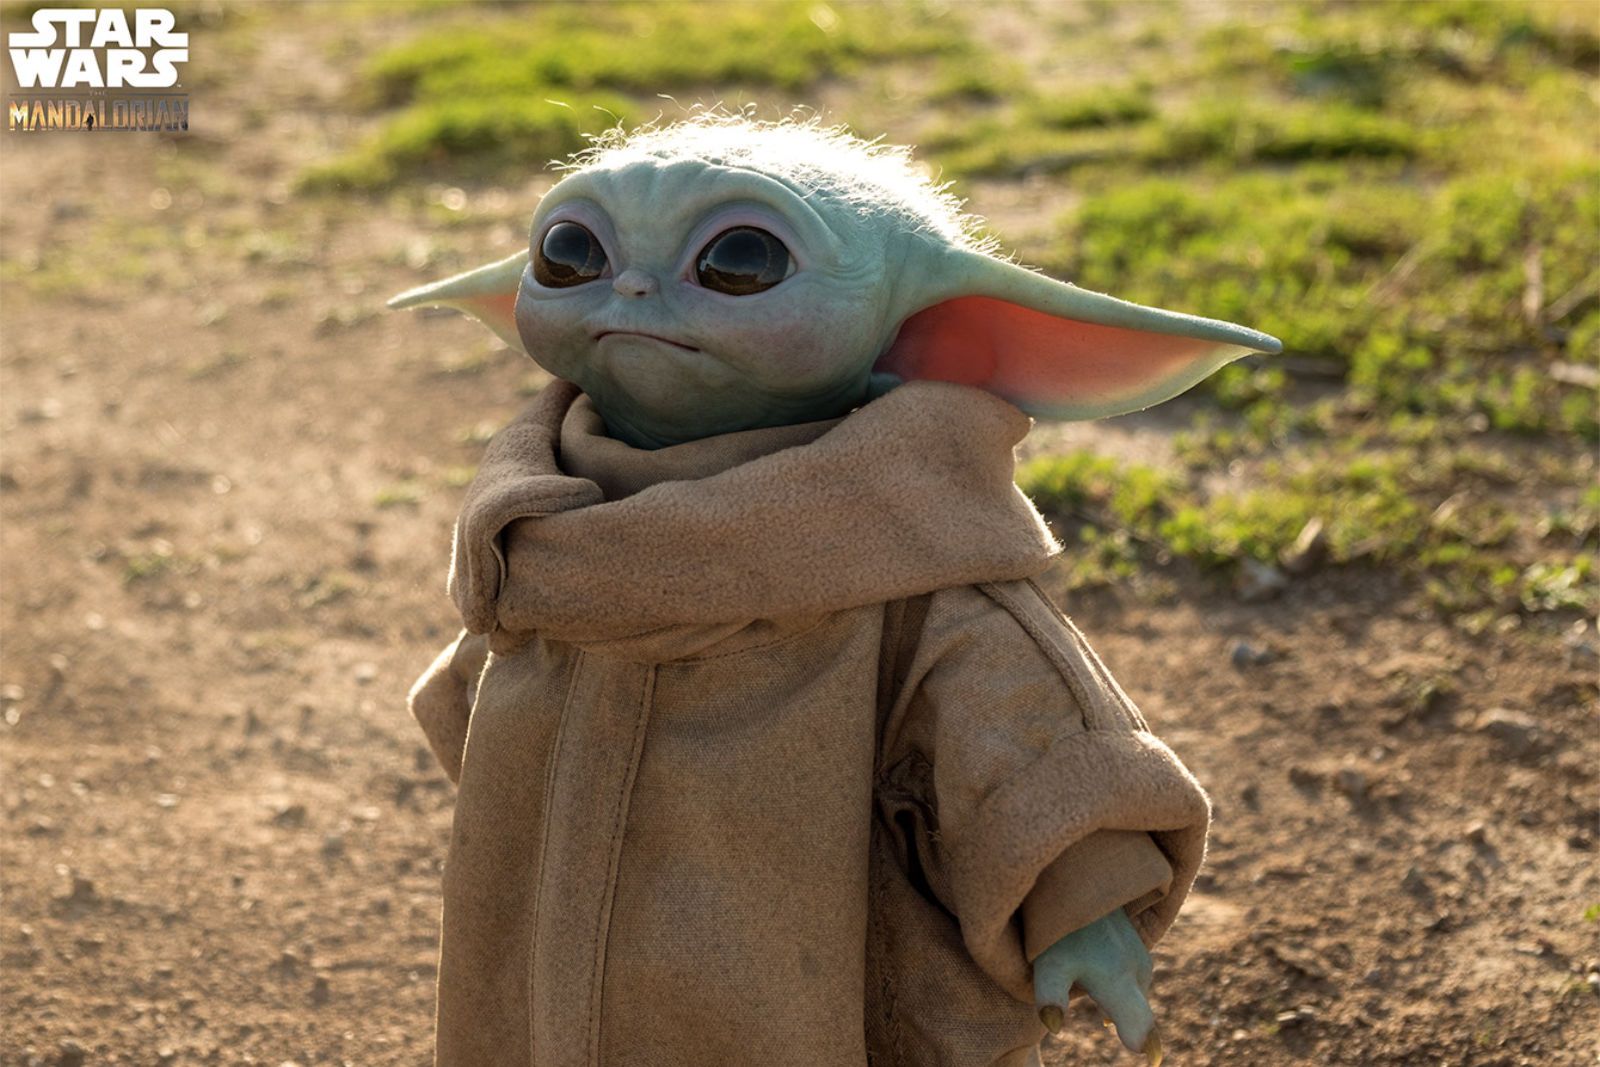 You can now order a life-size Baby Yoda for just 350 image 1